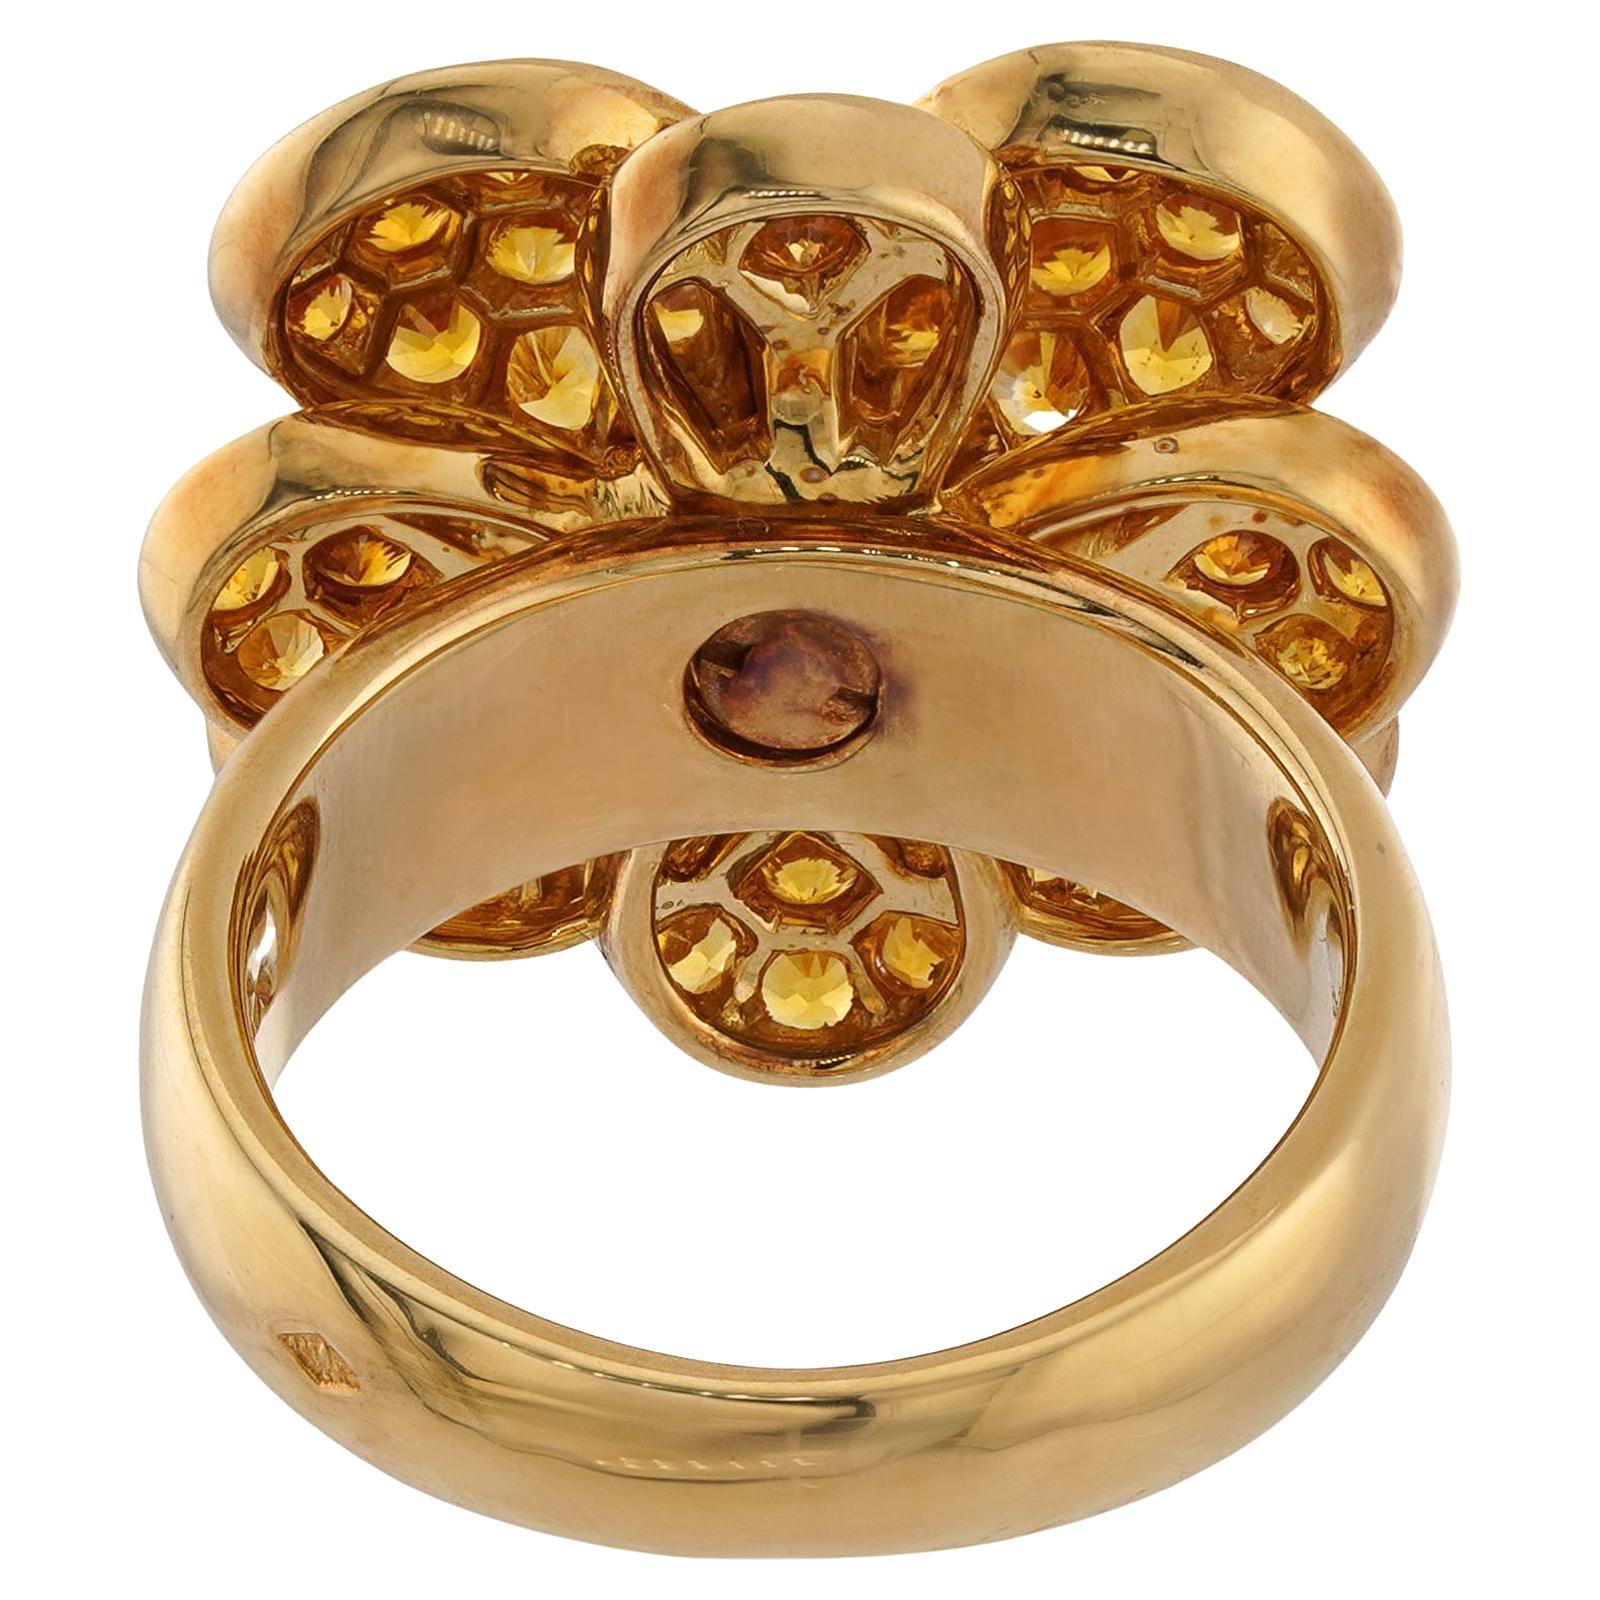 VAN CLEEF & ARPELS Yellow Sapphire Diamond Gold Flower Ring In Excellent Condition For Sale In New York, NY